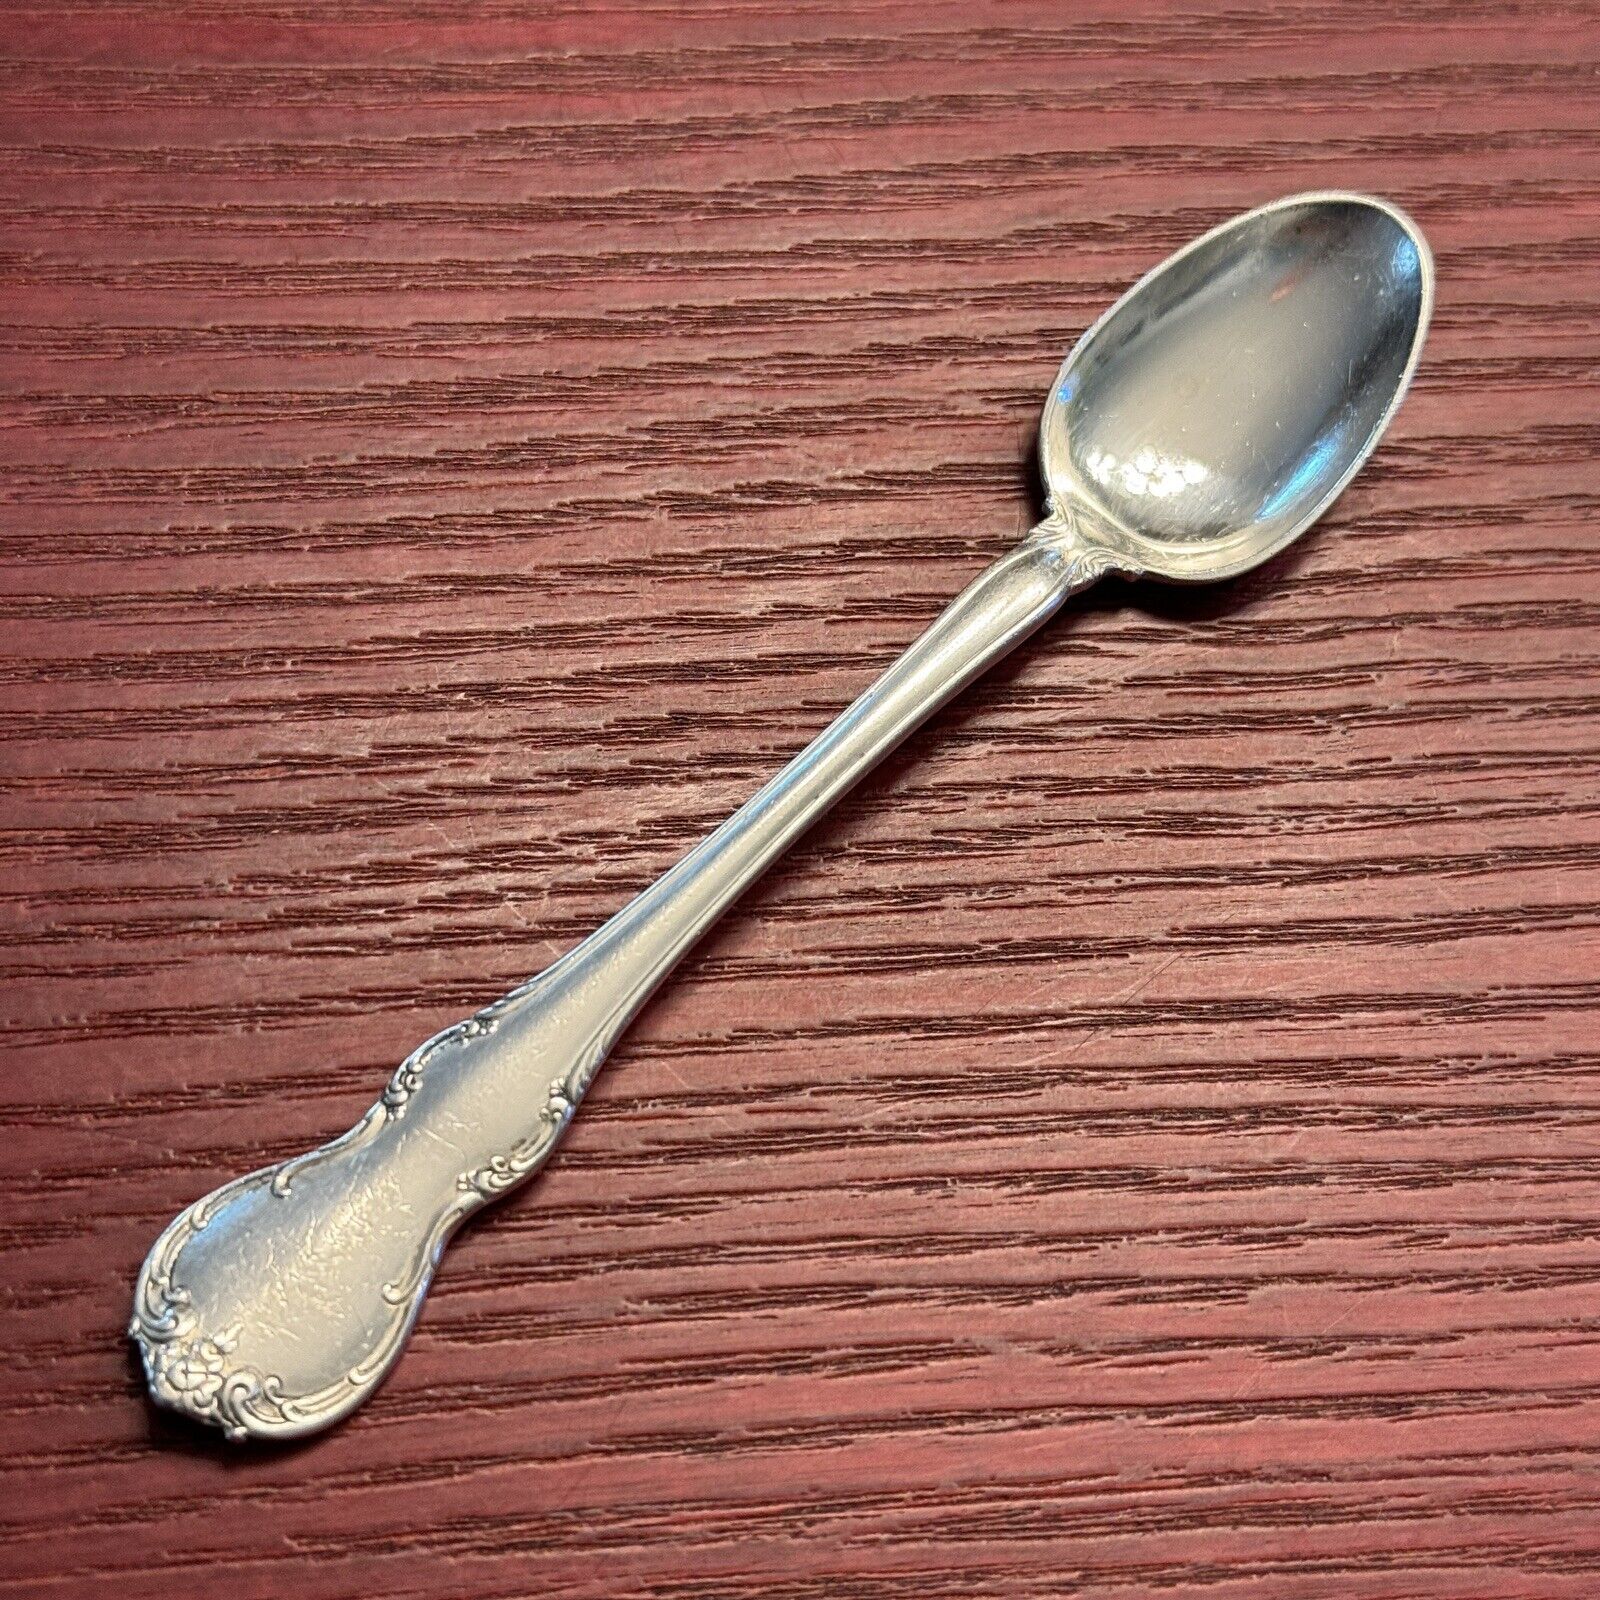 French Provincial By Towel Silver Sterling Infant Feeding Spoon C.1948 4 7/8”